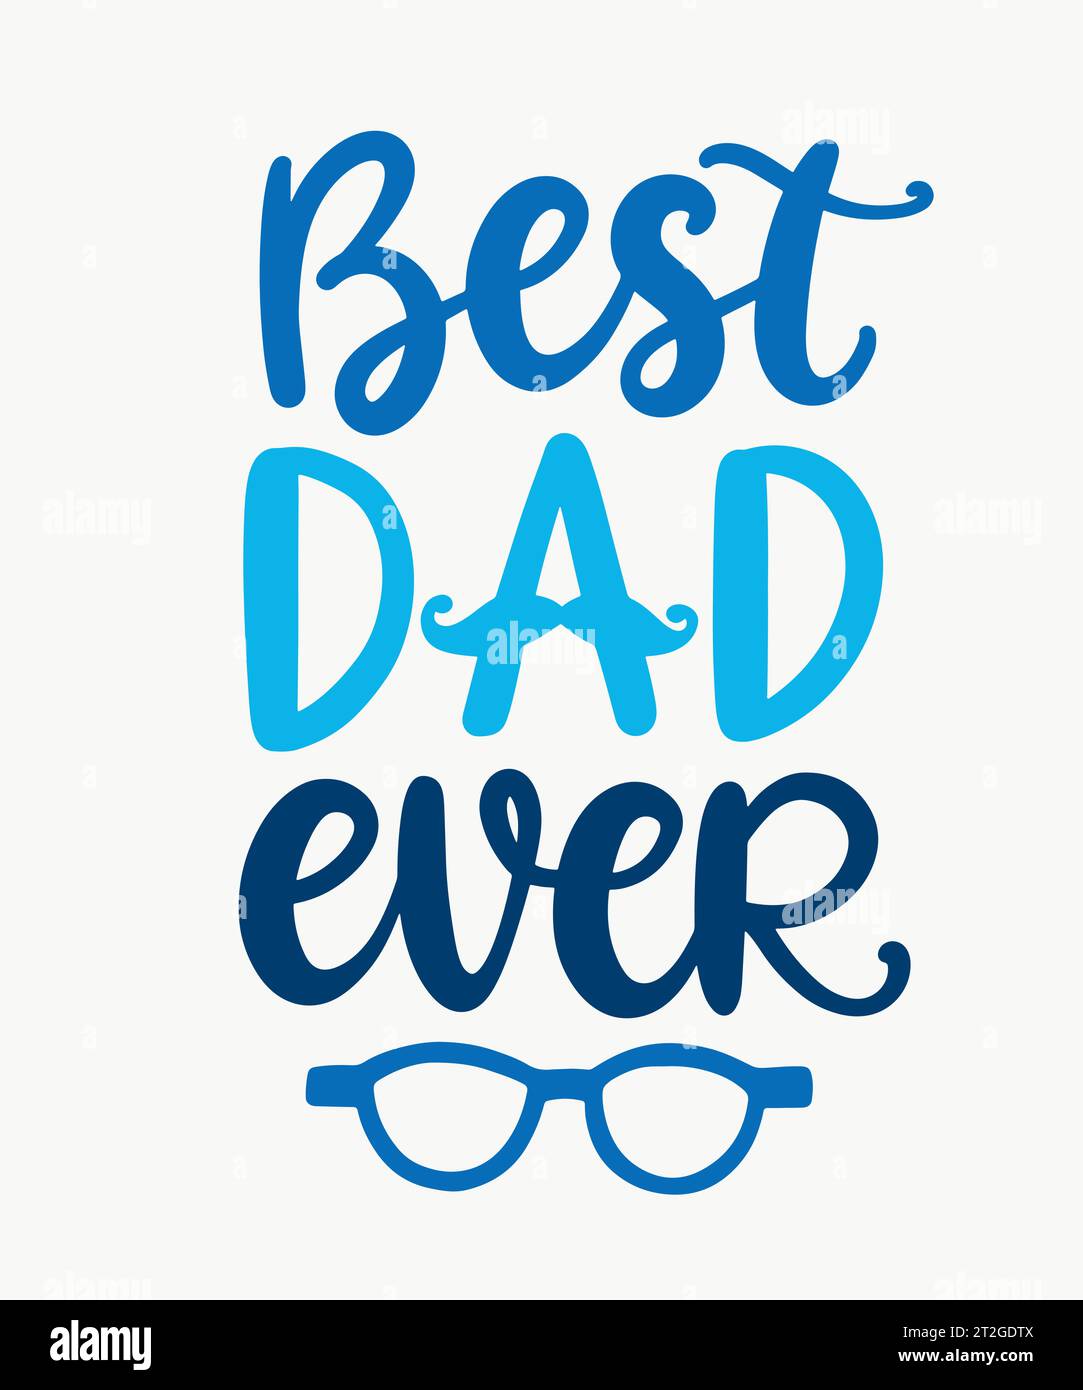 Best dad ever. Fathers day greeting card ettering Stock Vector